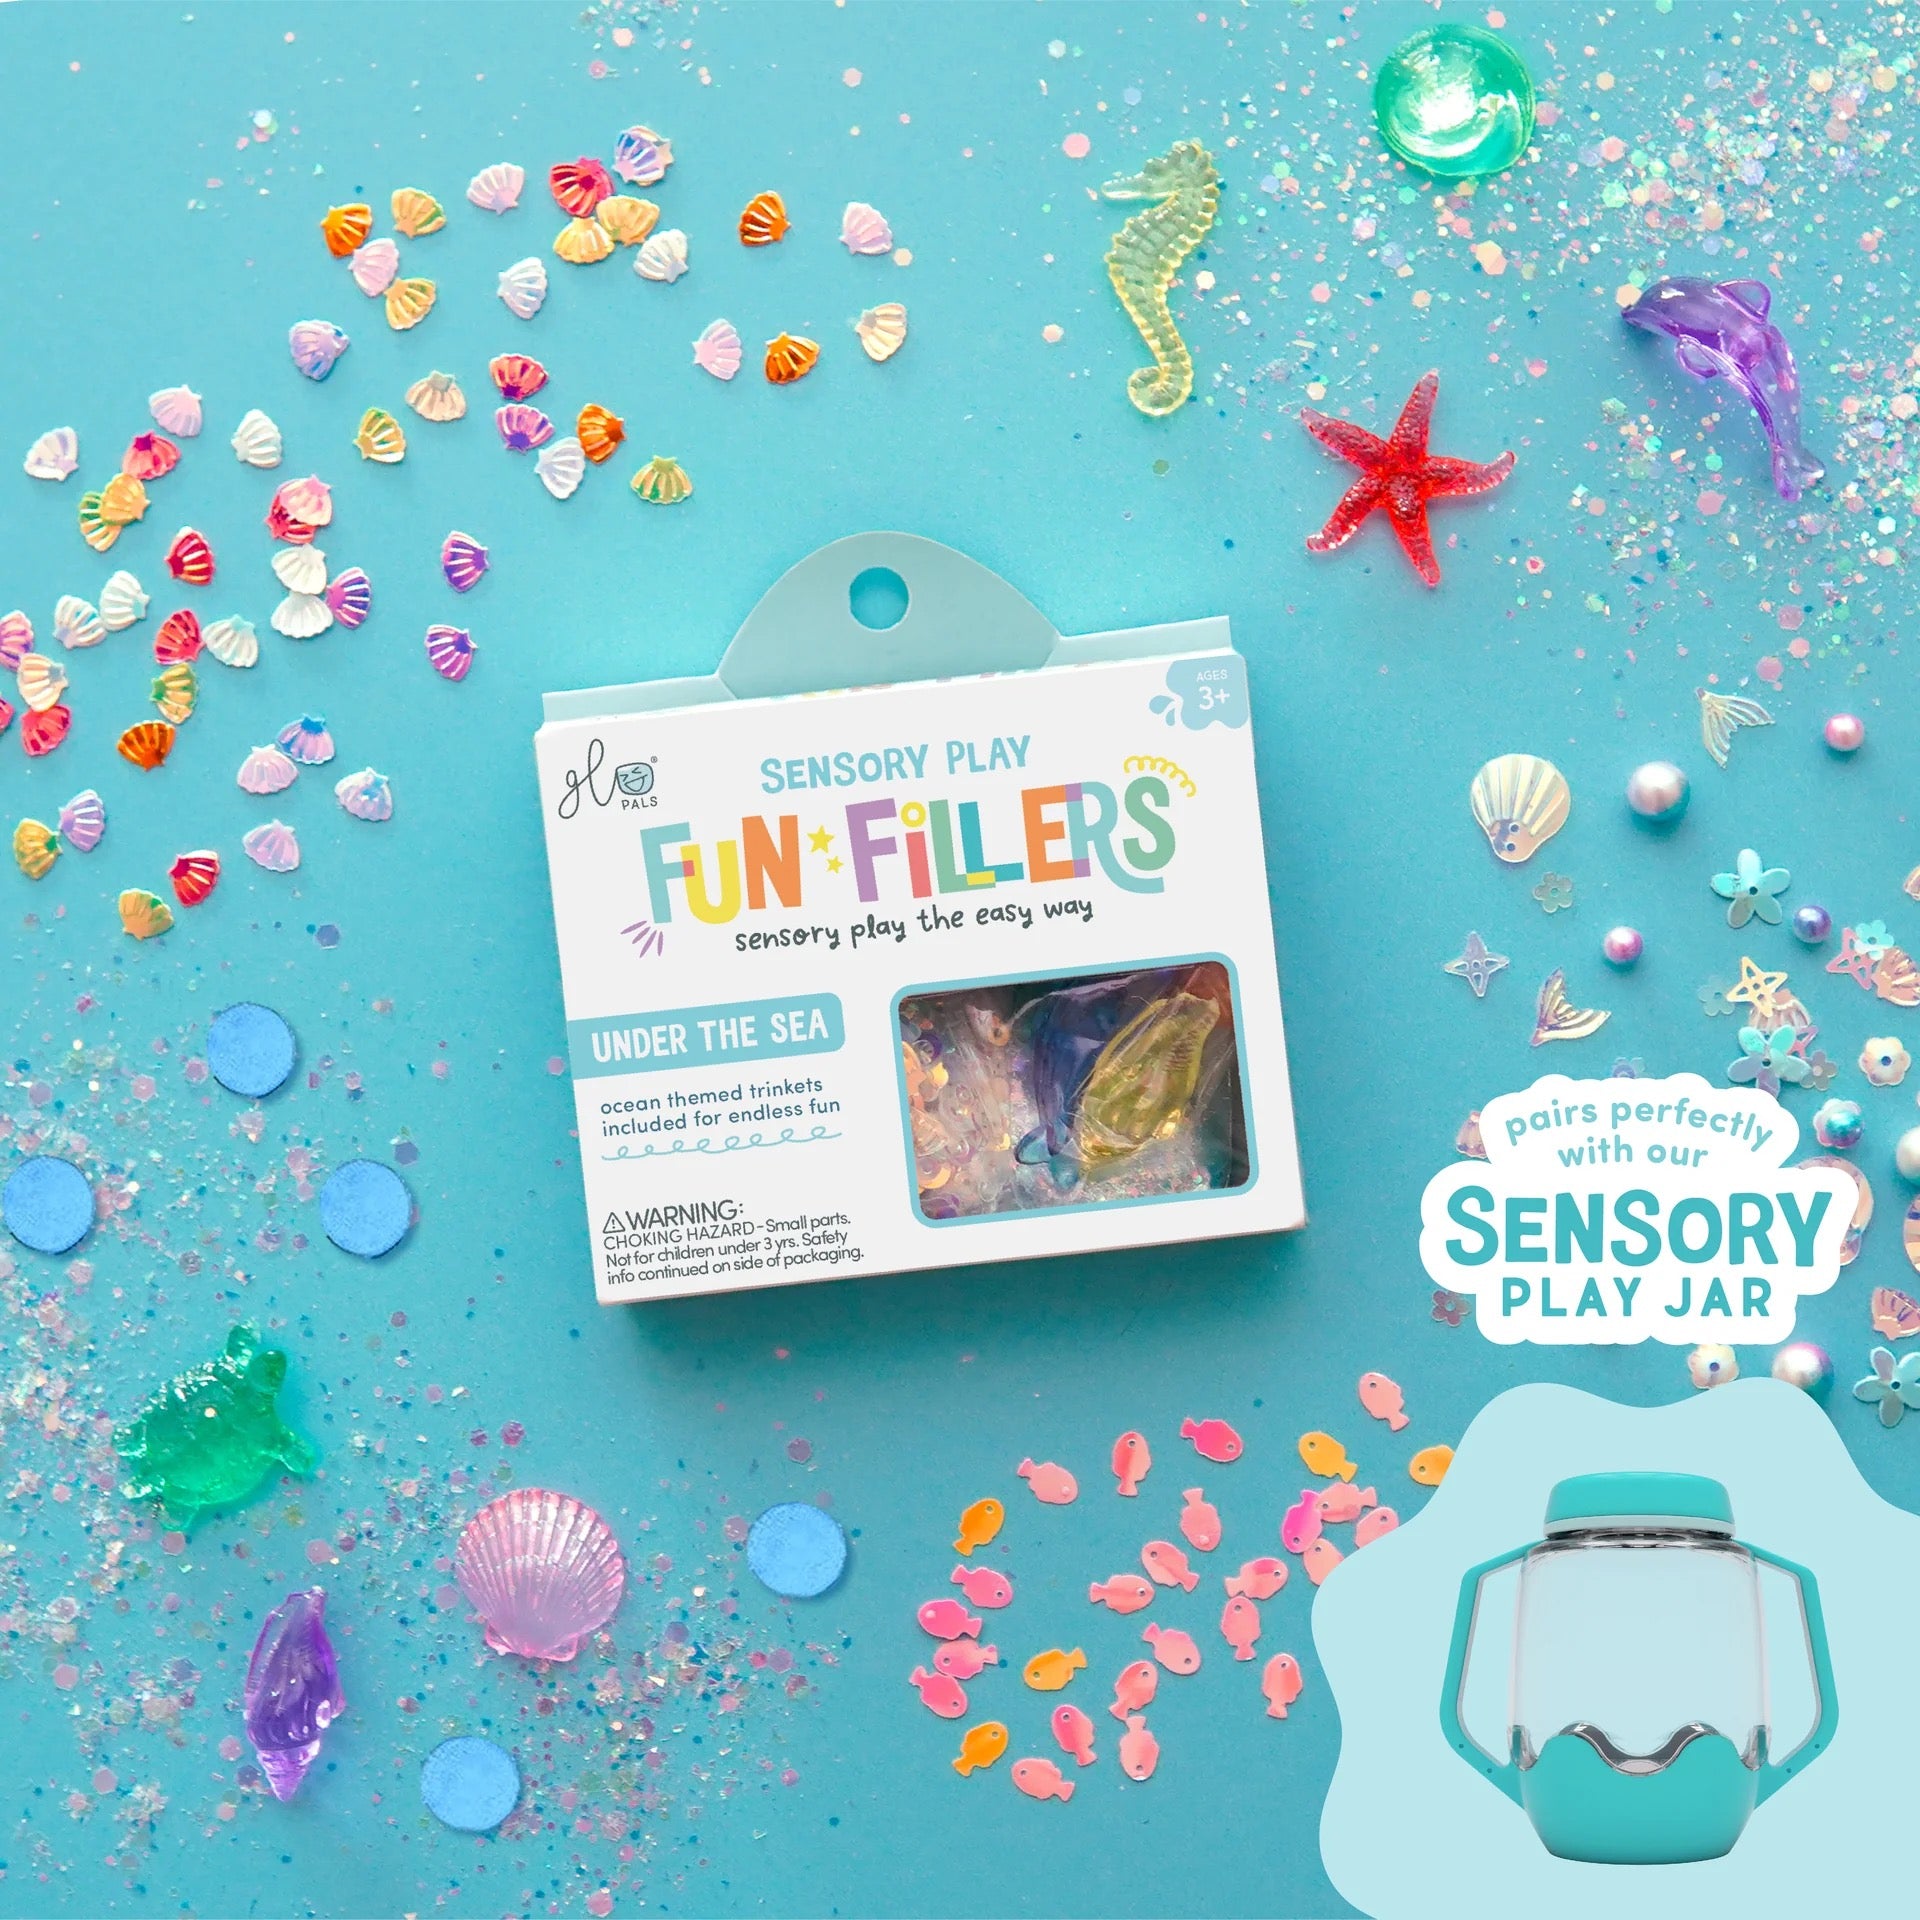 Sensory Play Fun Fillers Under The Sea By Glo Pals